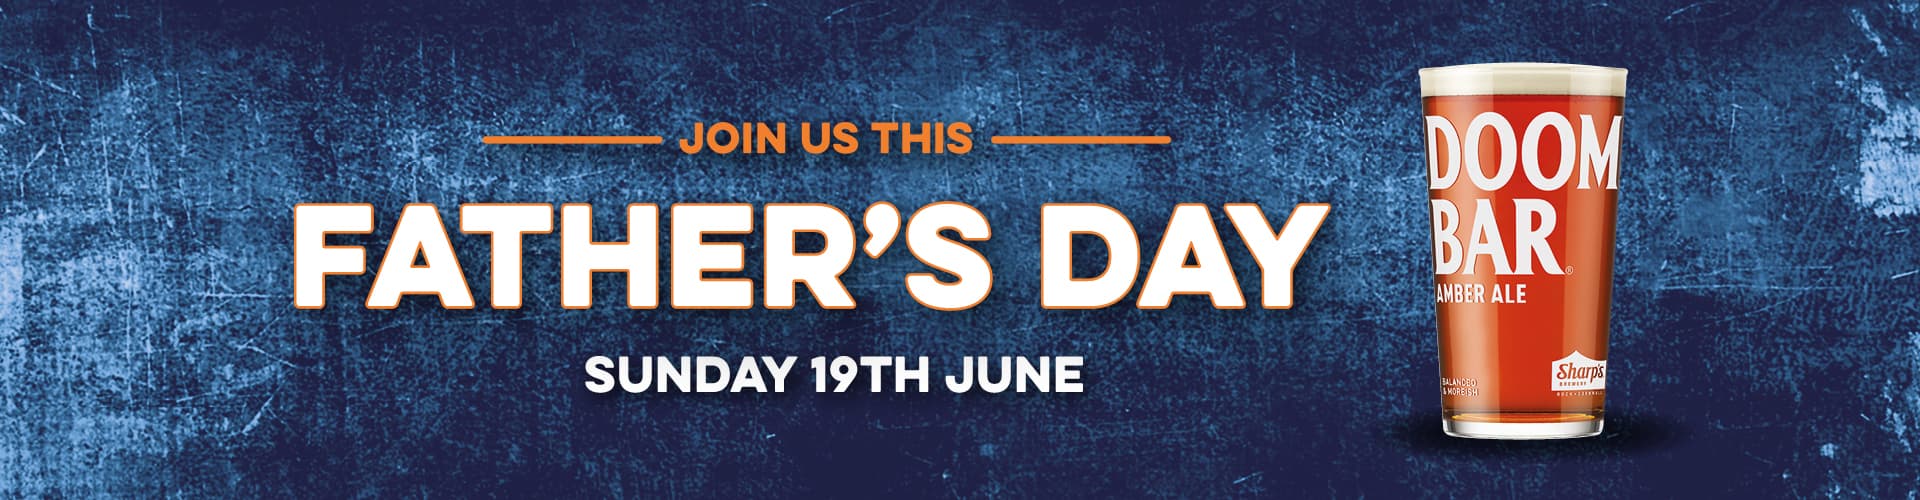 Father's Day at The Wellington Arms pub in Marlborough